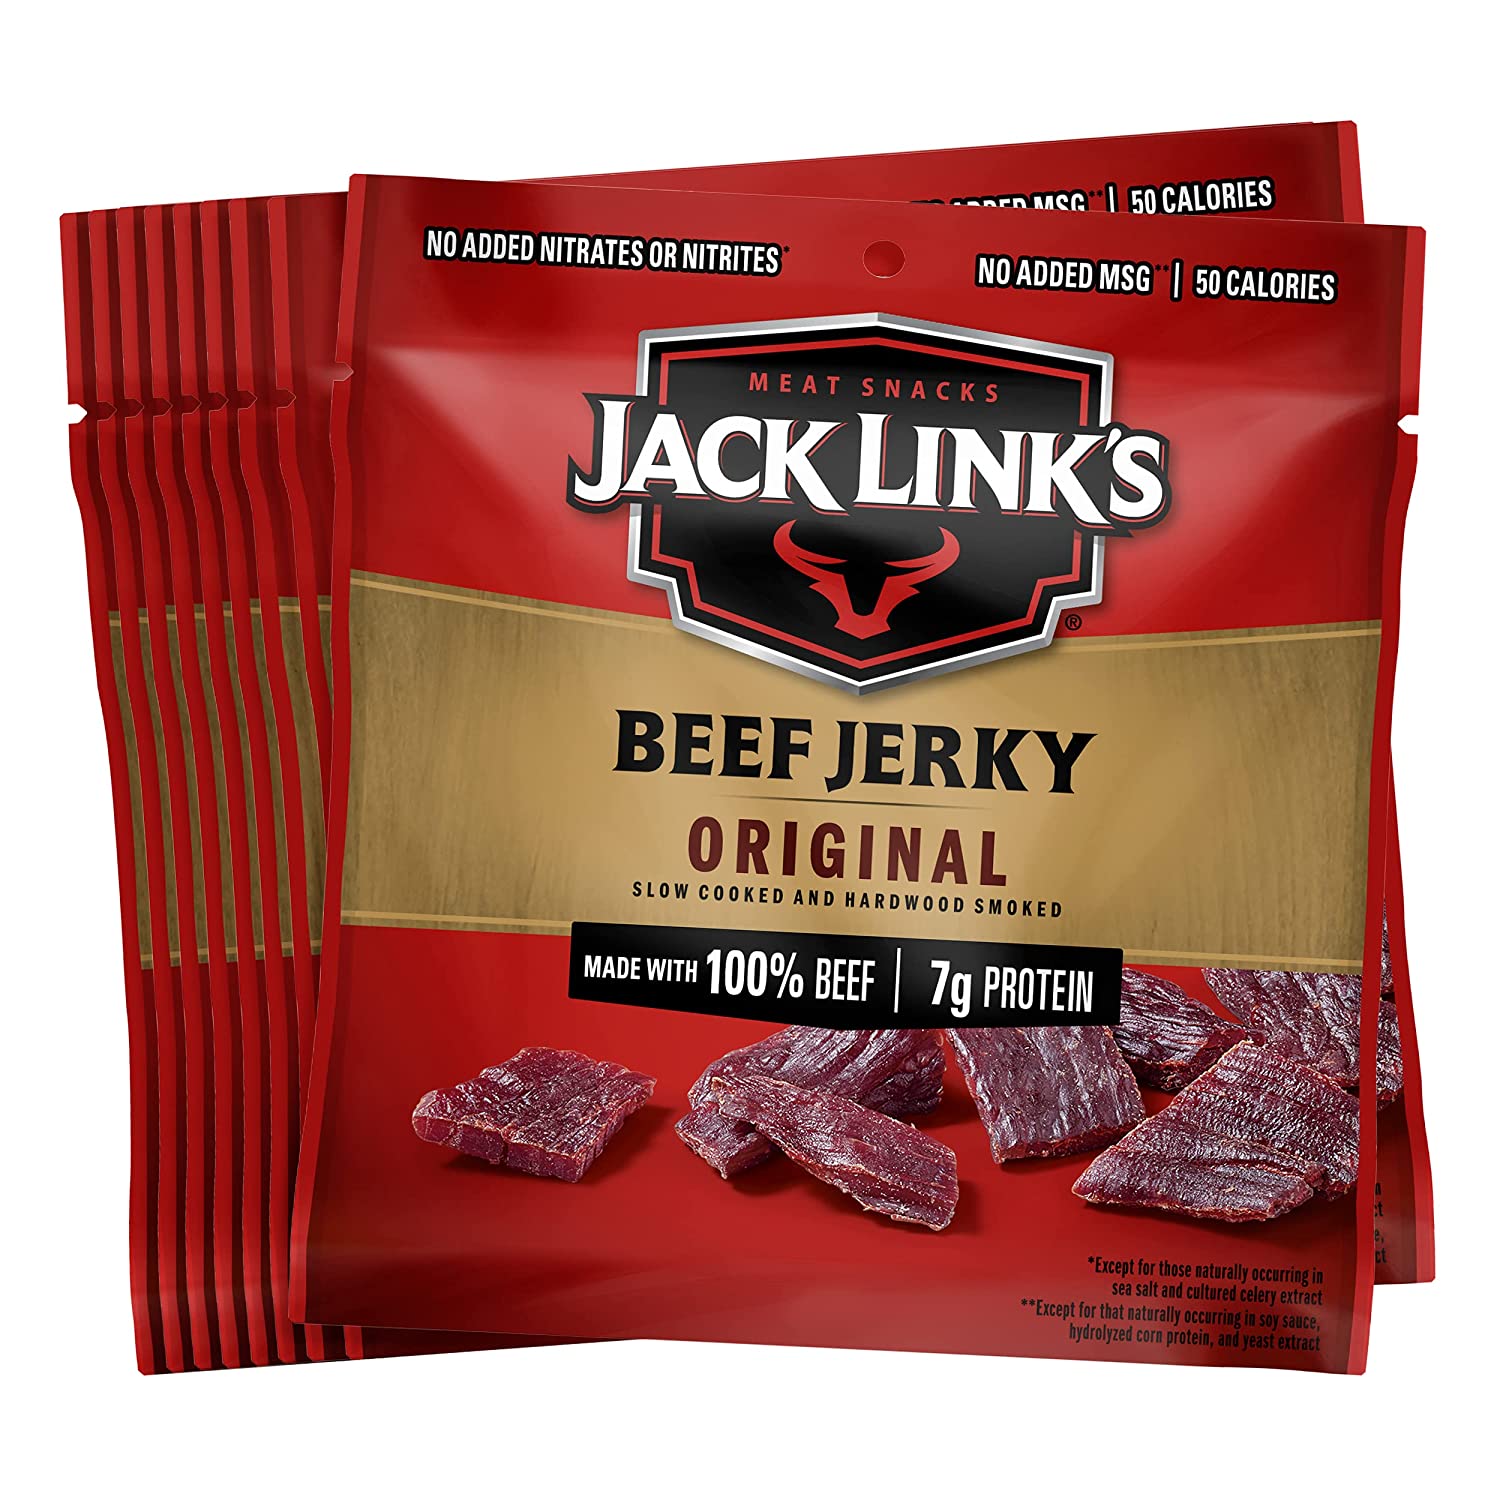 20-Pack 0.625-Oz Jack Link's Beef Jerky (Original) $16.02 w/ S&S + Free Shipping w/ Prime or on $25+